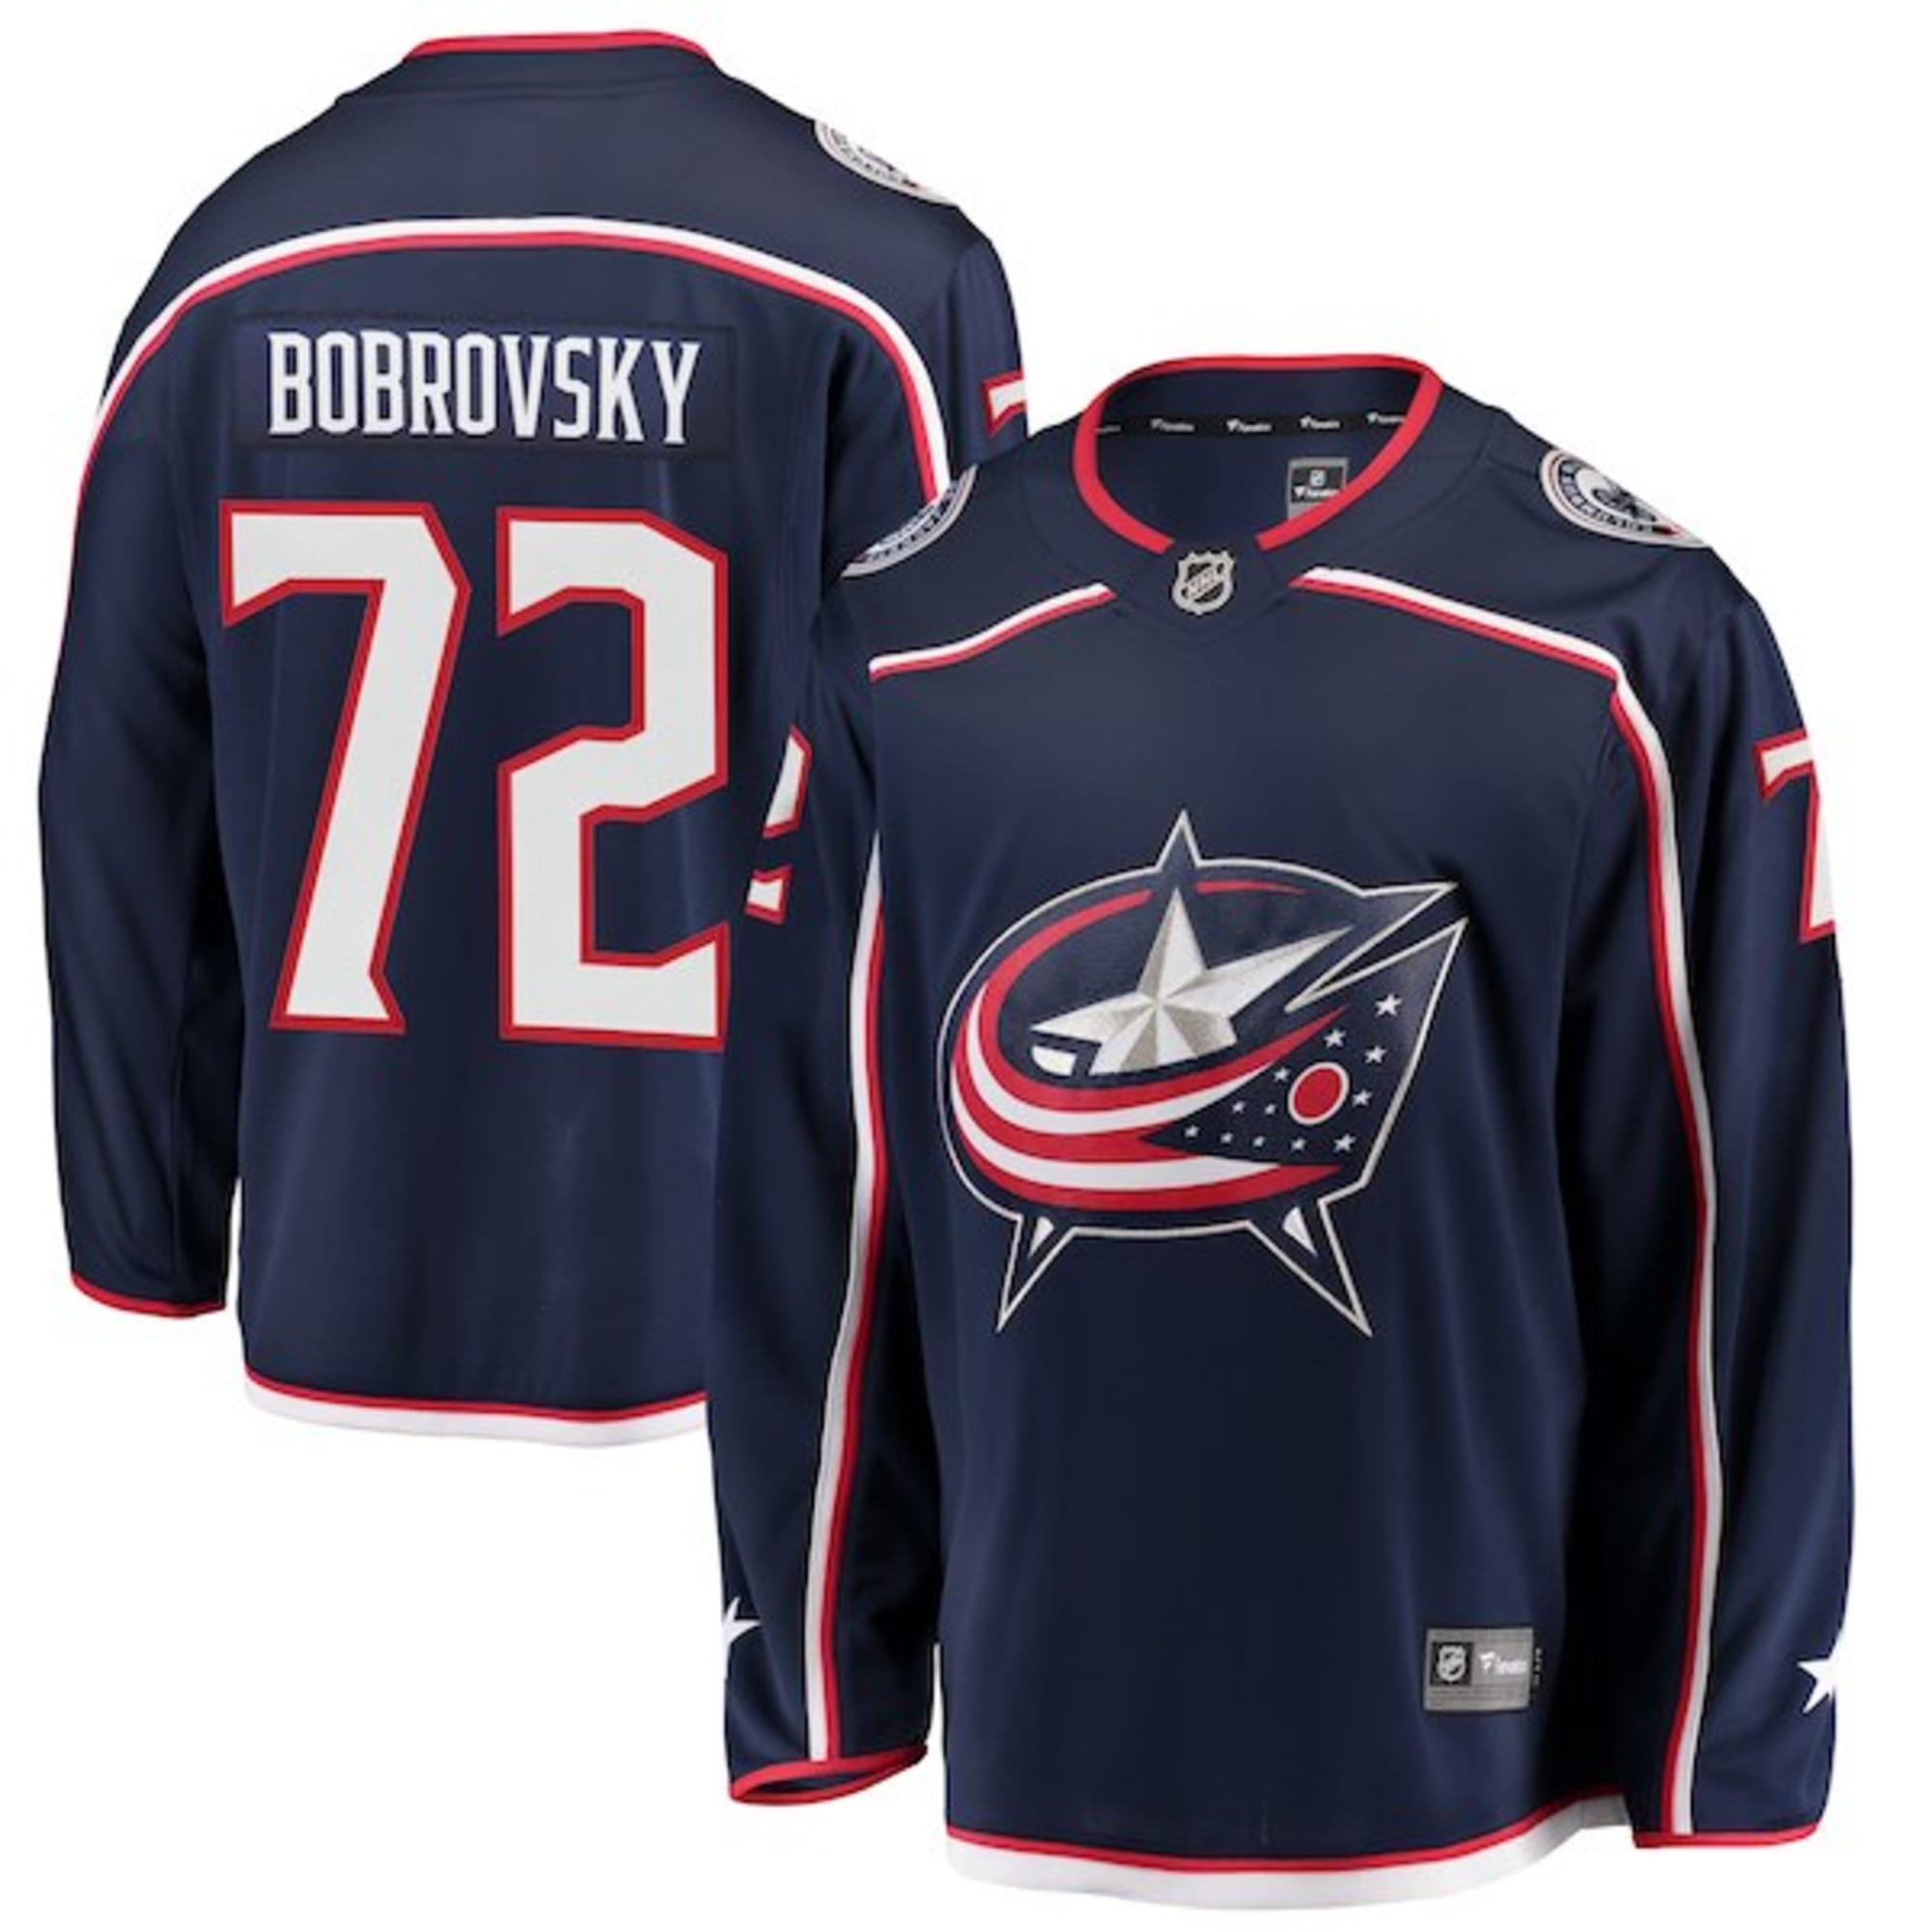 Columbus Blue Jackets Holiday Gift Guide